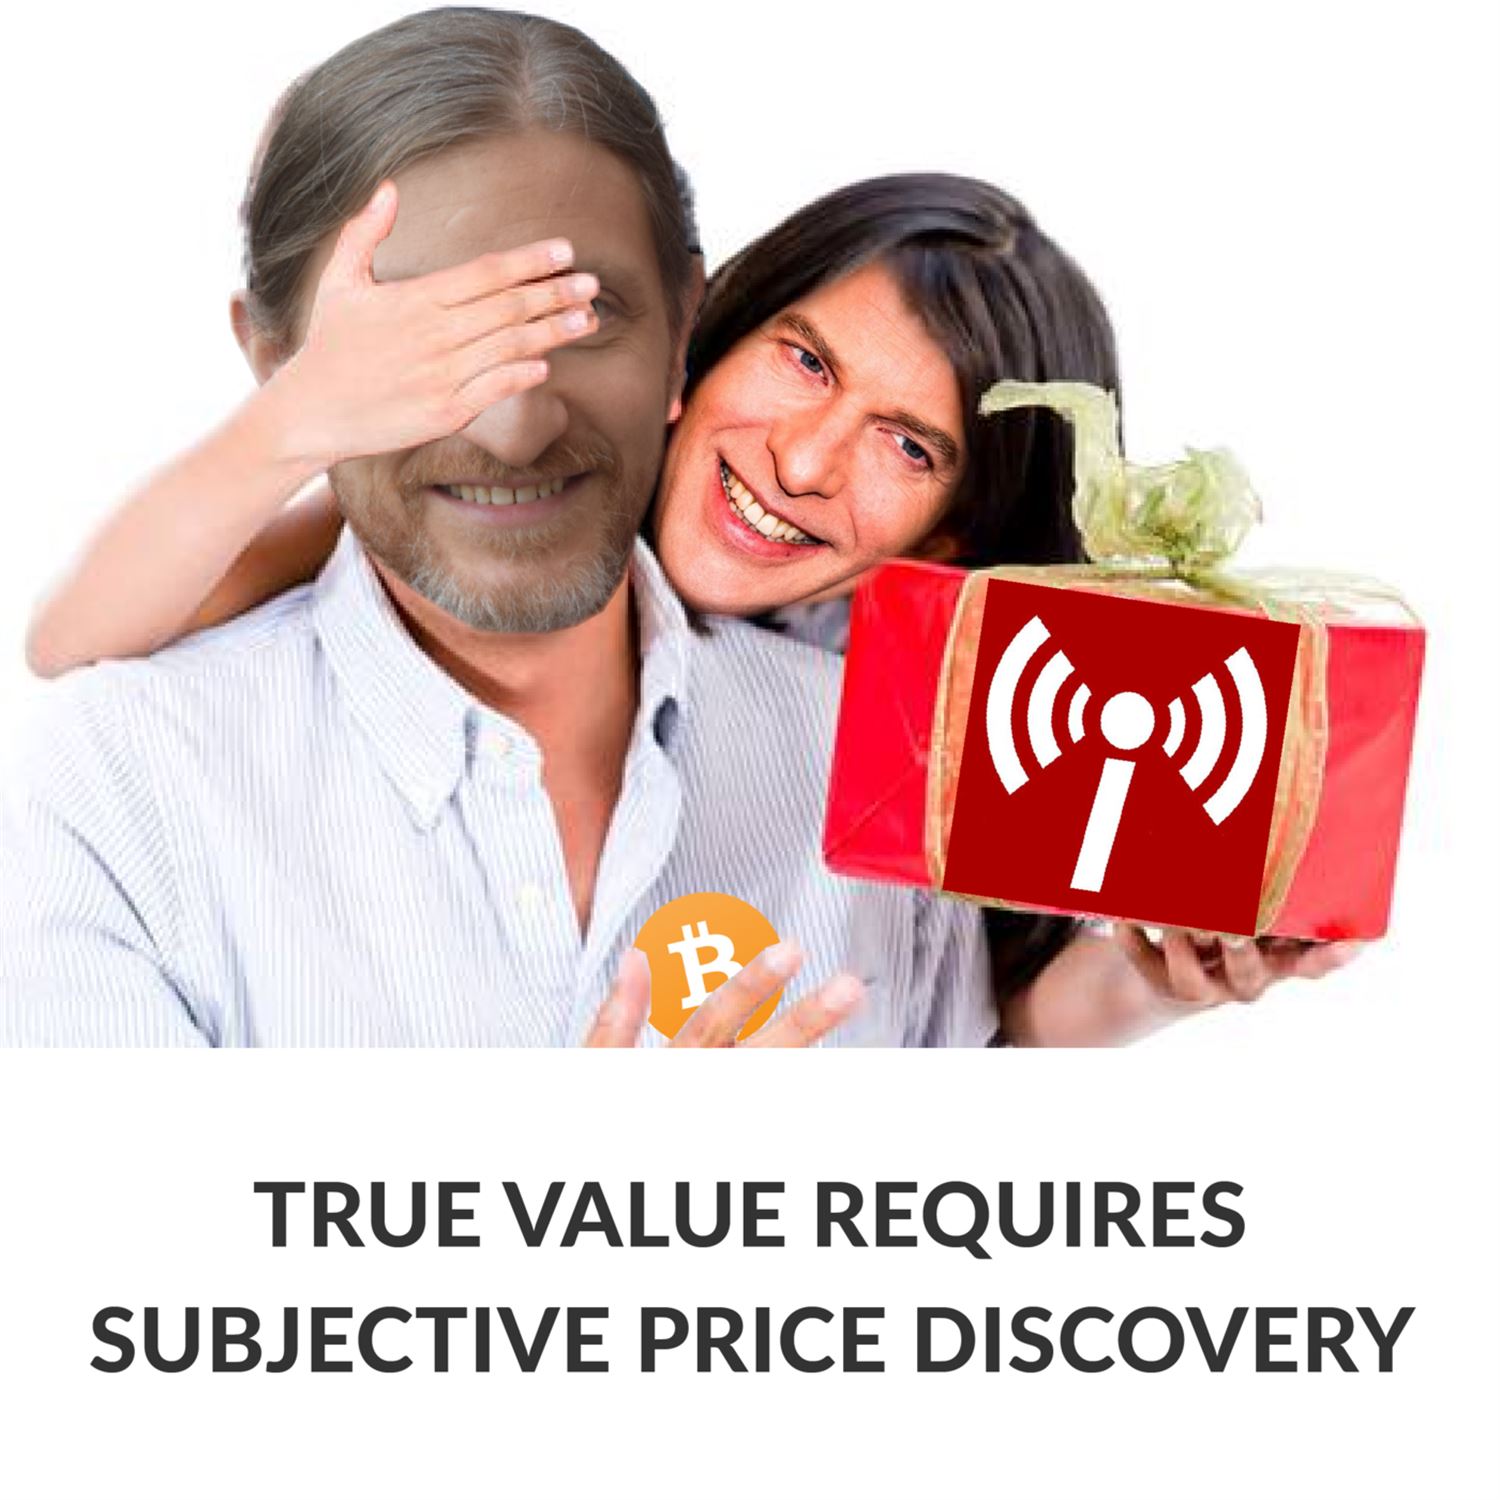 Value is subjective